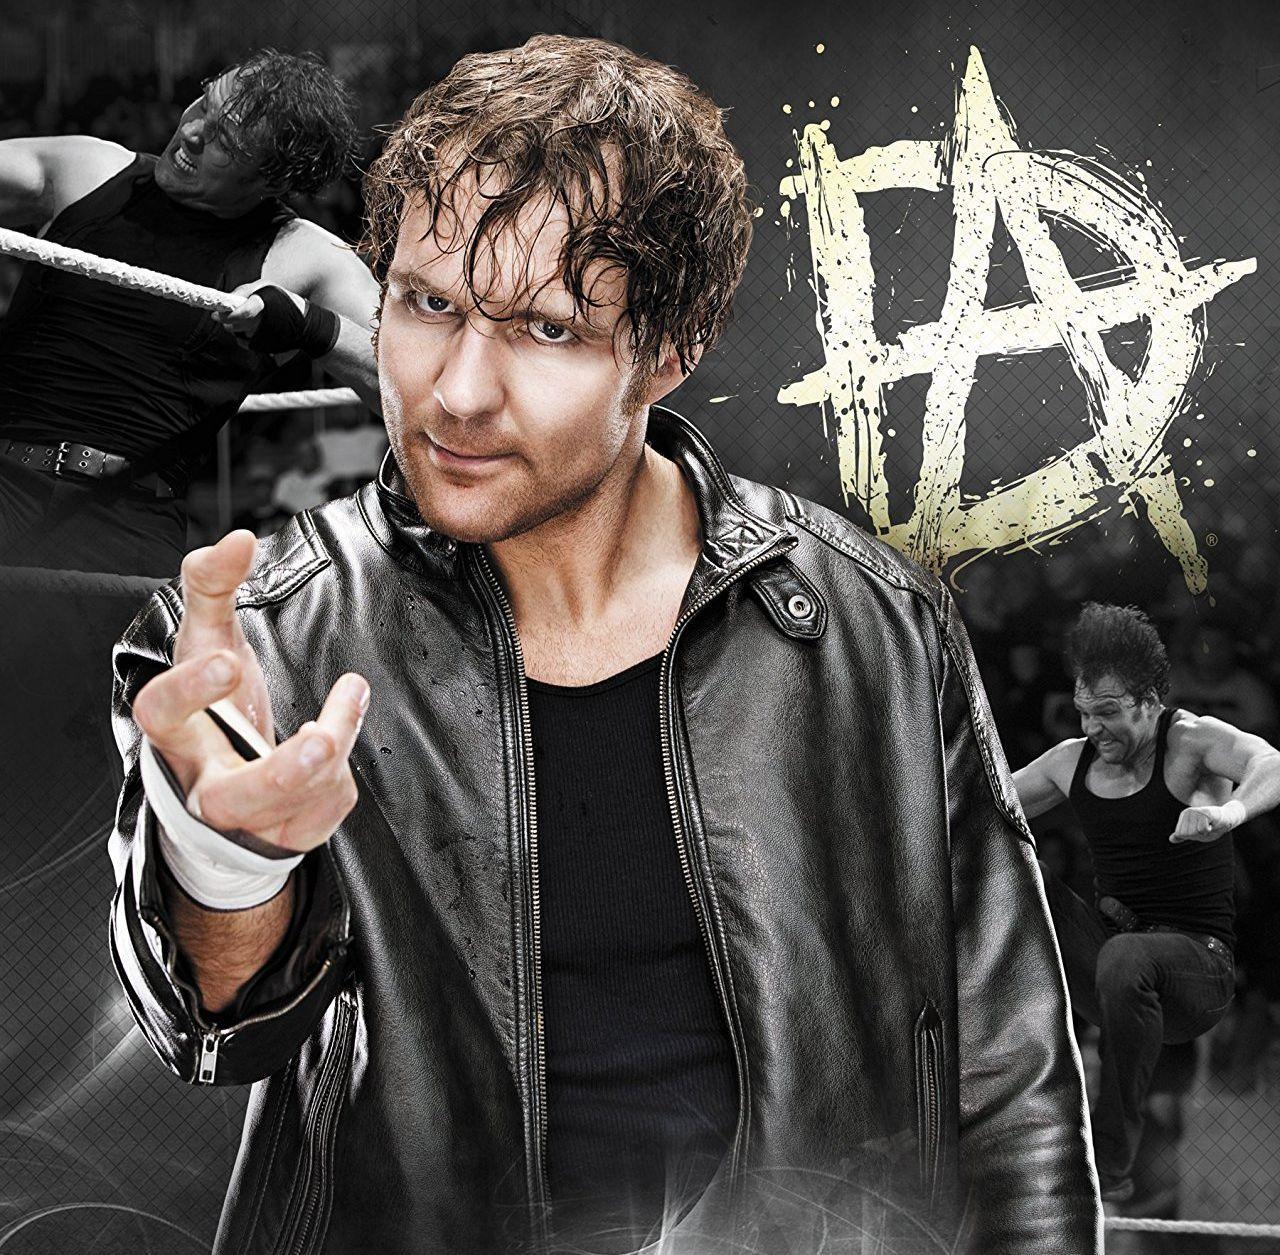 Dean Ambrose WWE 2018 HD Wallpaper and Image Download Free